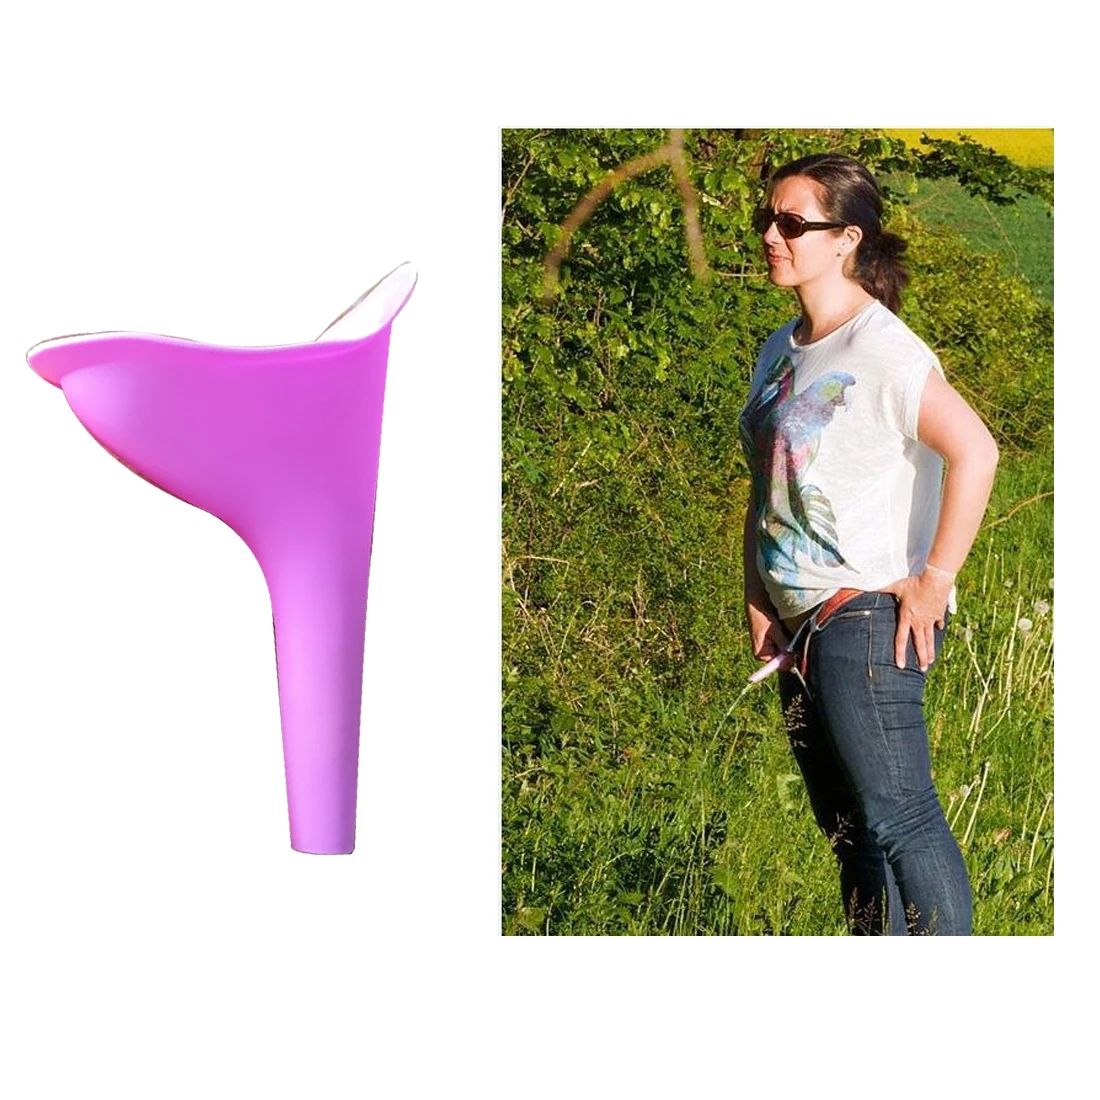 

New Design Women Urinal Outdoor Travel Camping Portable Female Urinal Soft Silicone Urination Device Stand Up & Pee